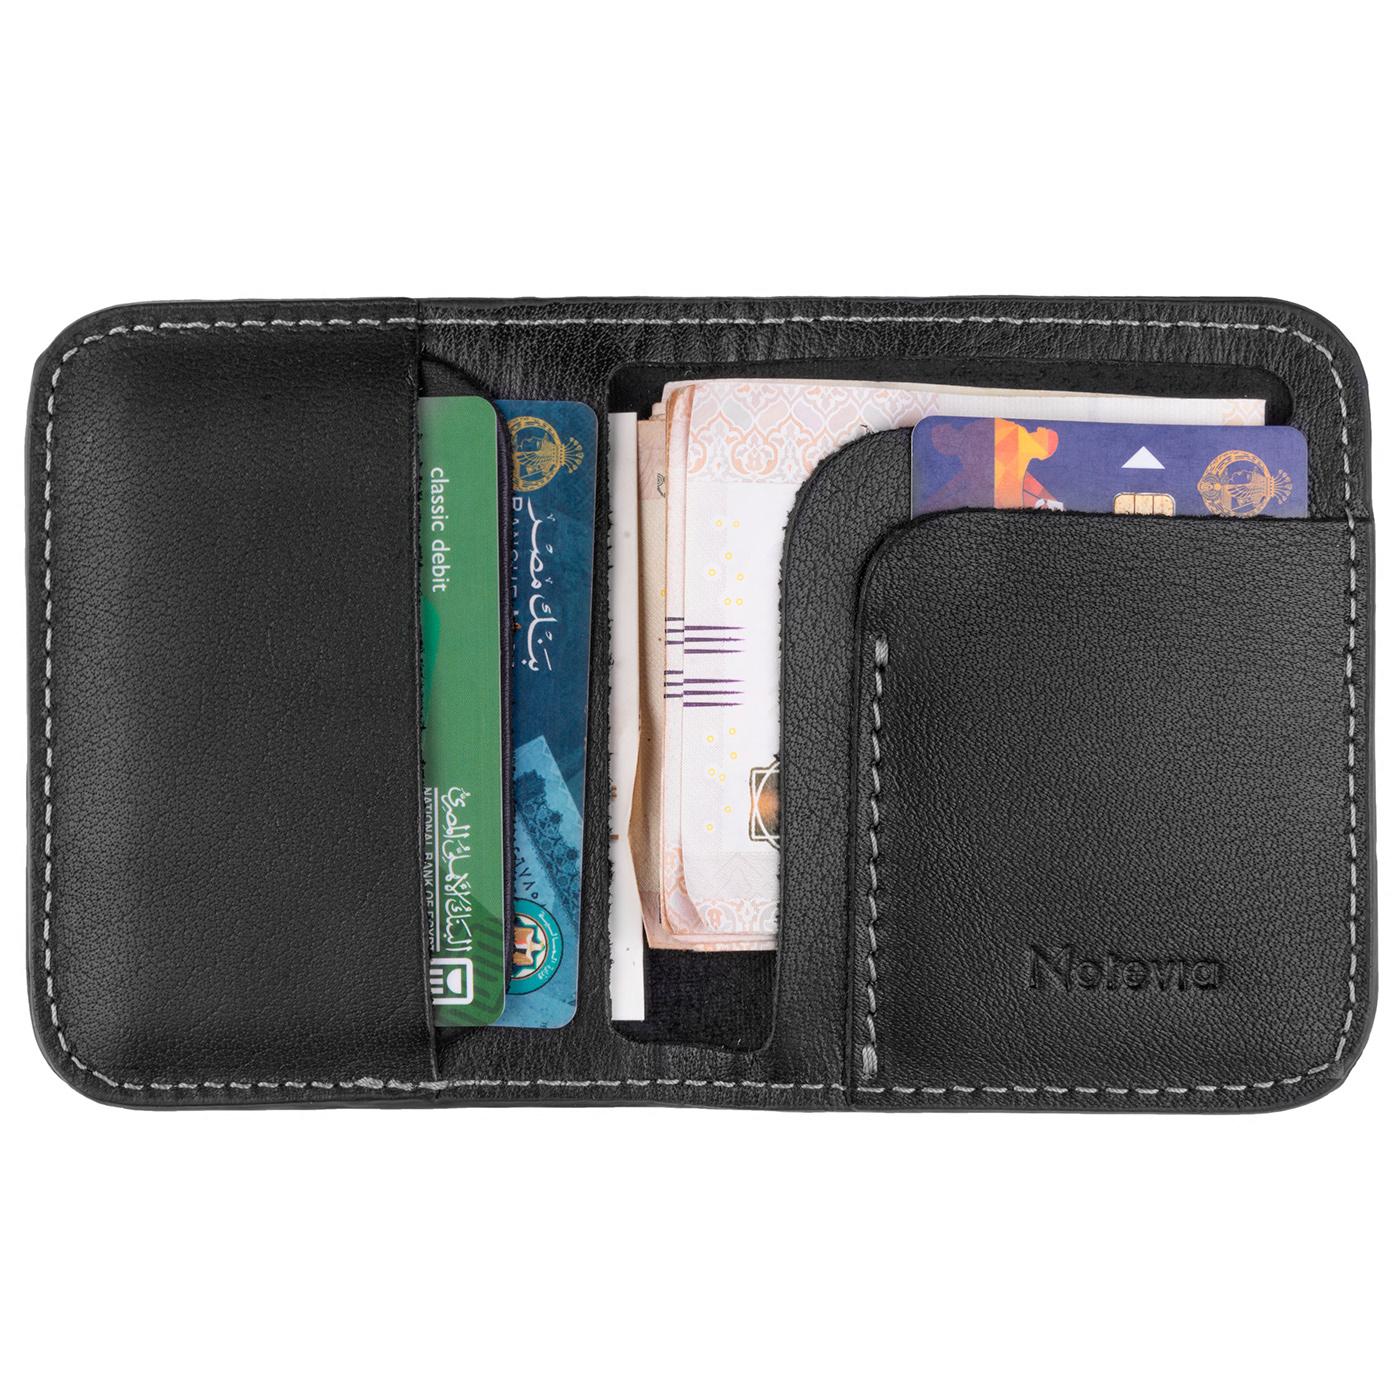 design product potography Product Photography photoshoot photographer Photography  product design  WALLET bag